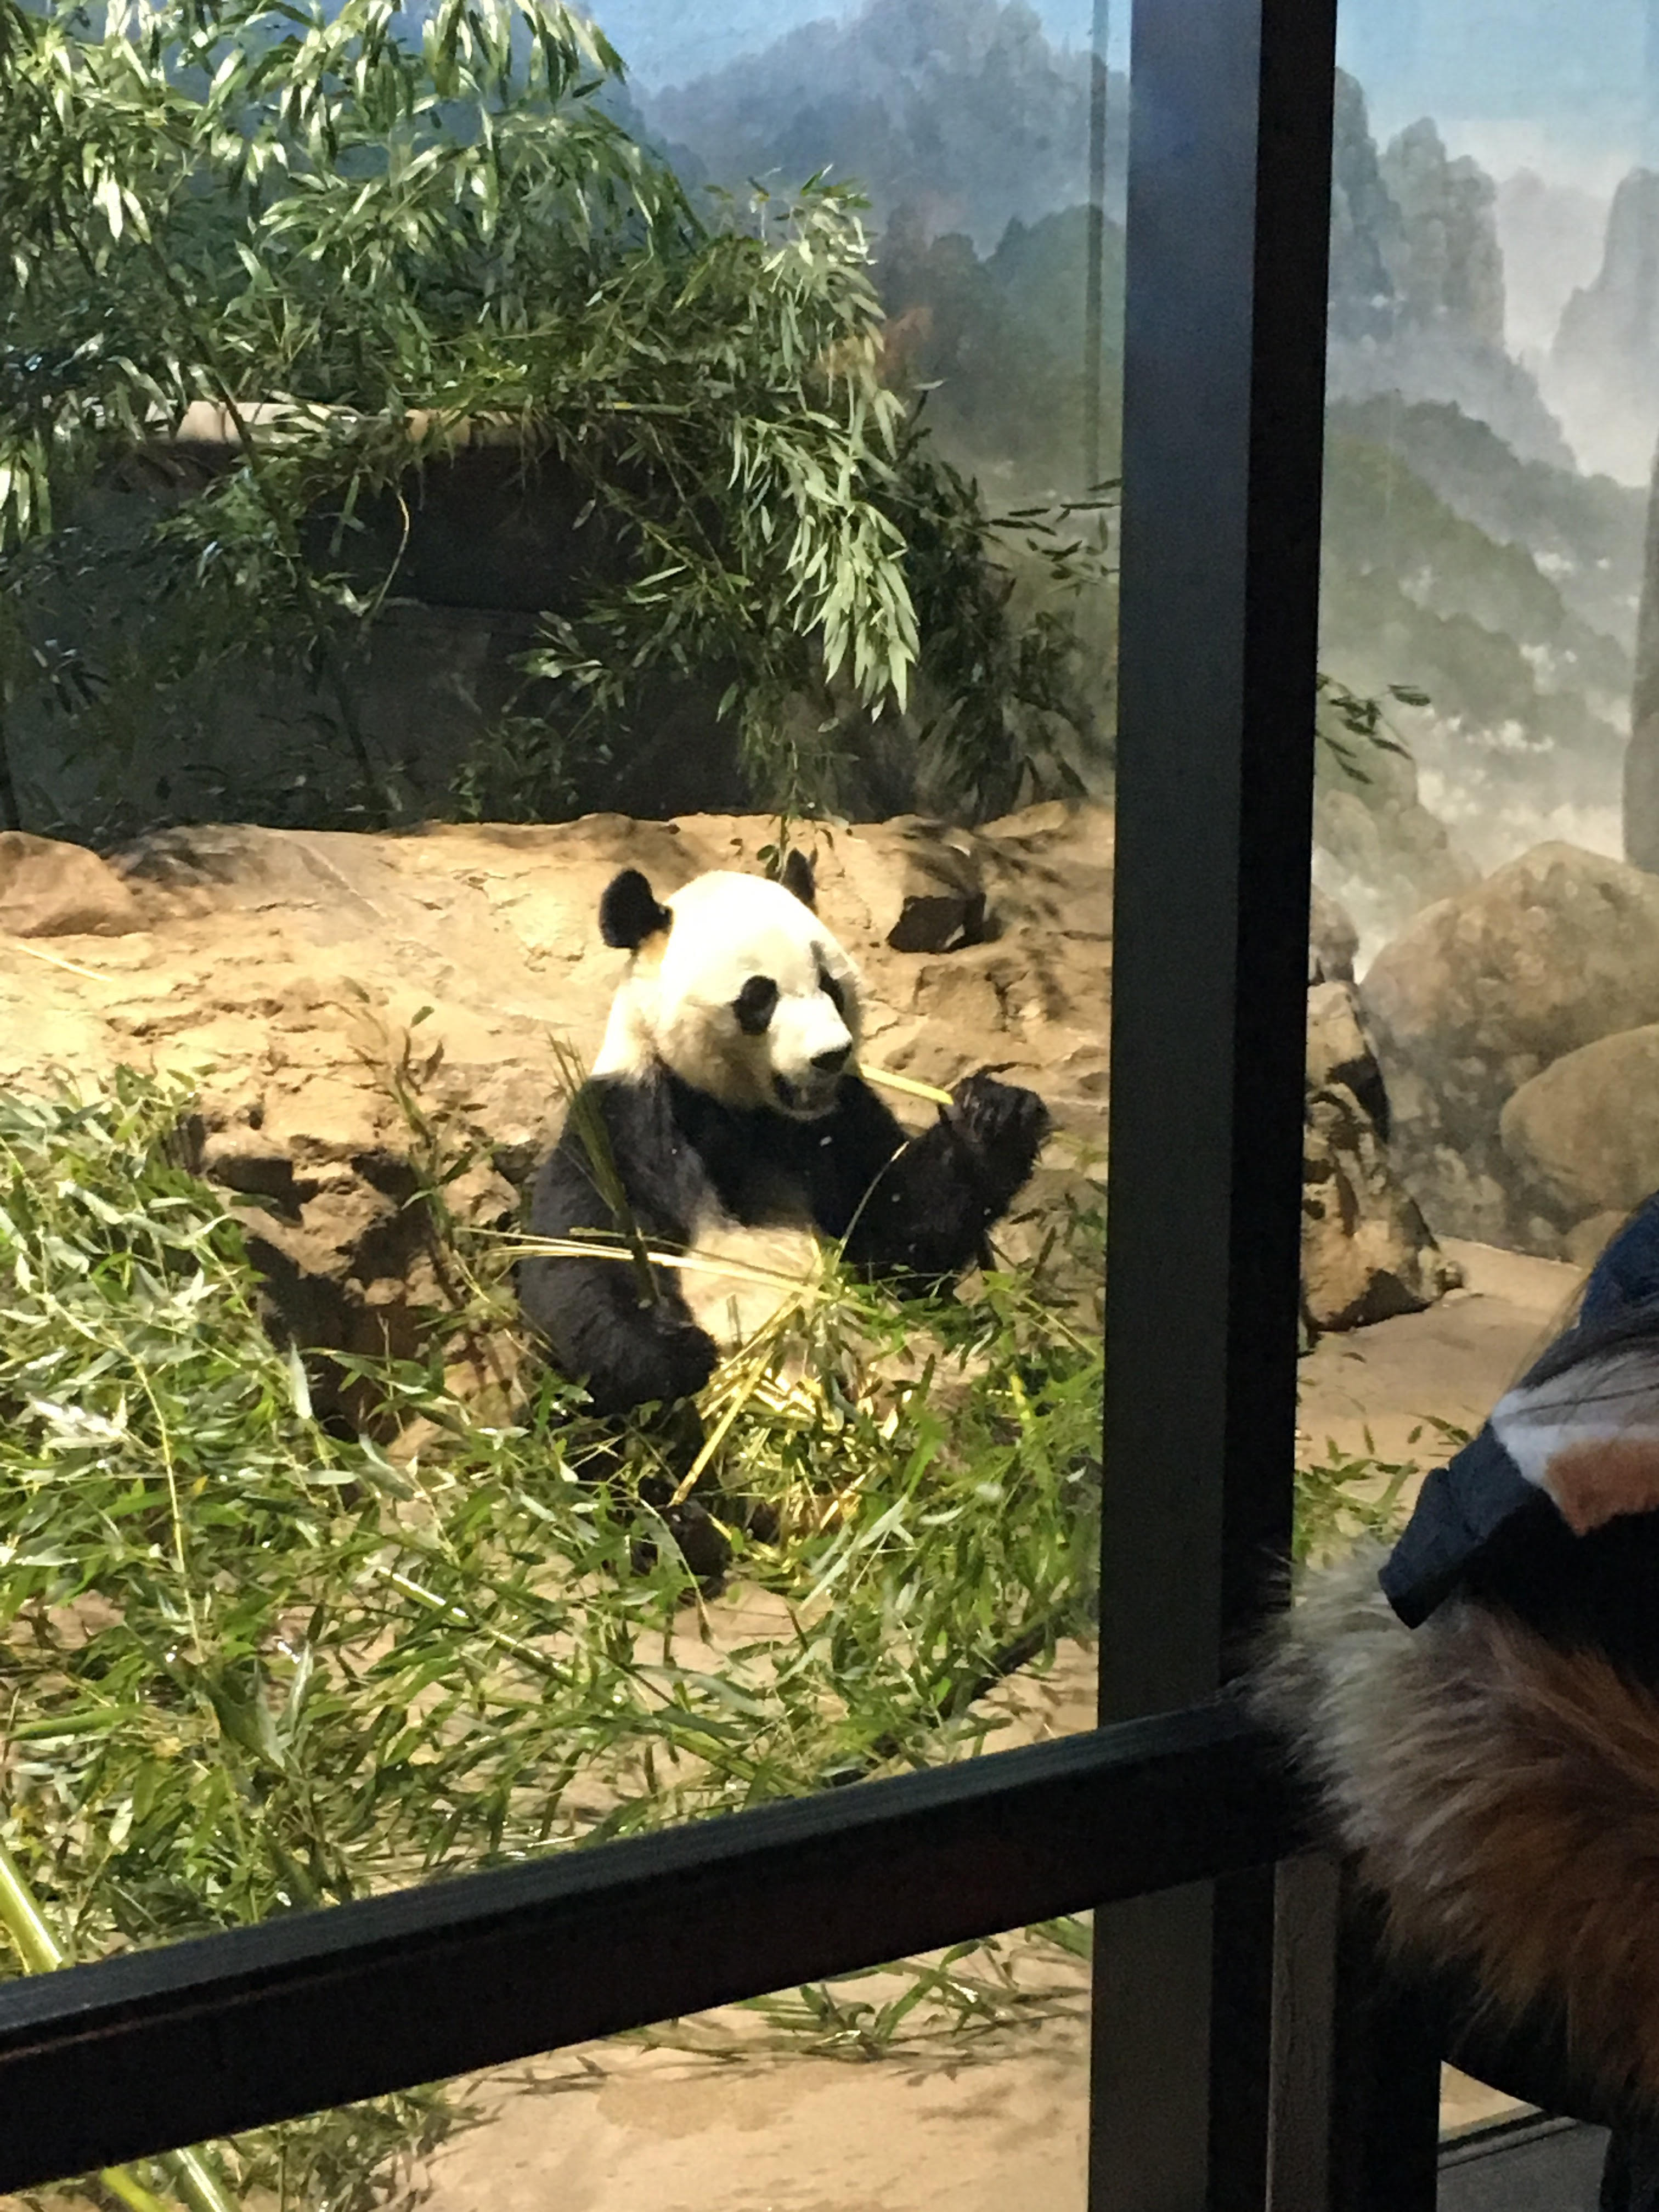 A giant panda bear sits in an enclosure and nibbles a bamboo shoot.